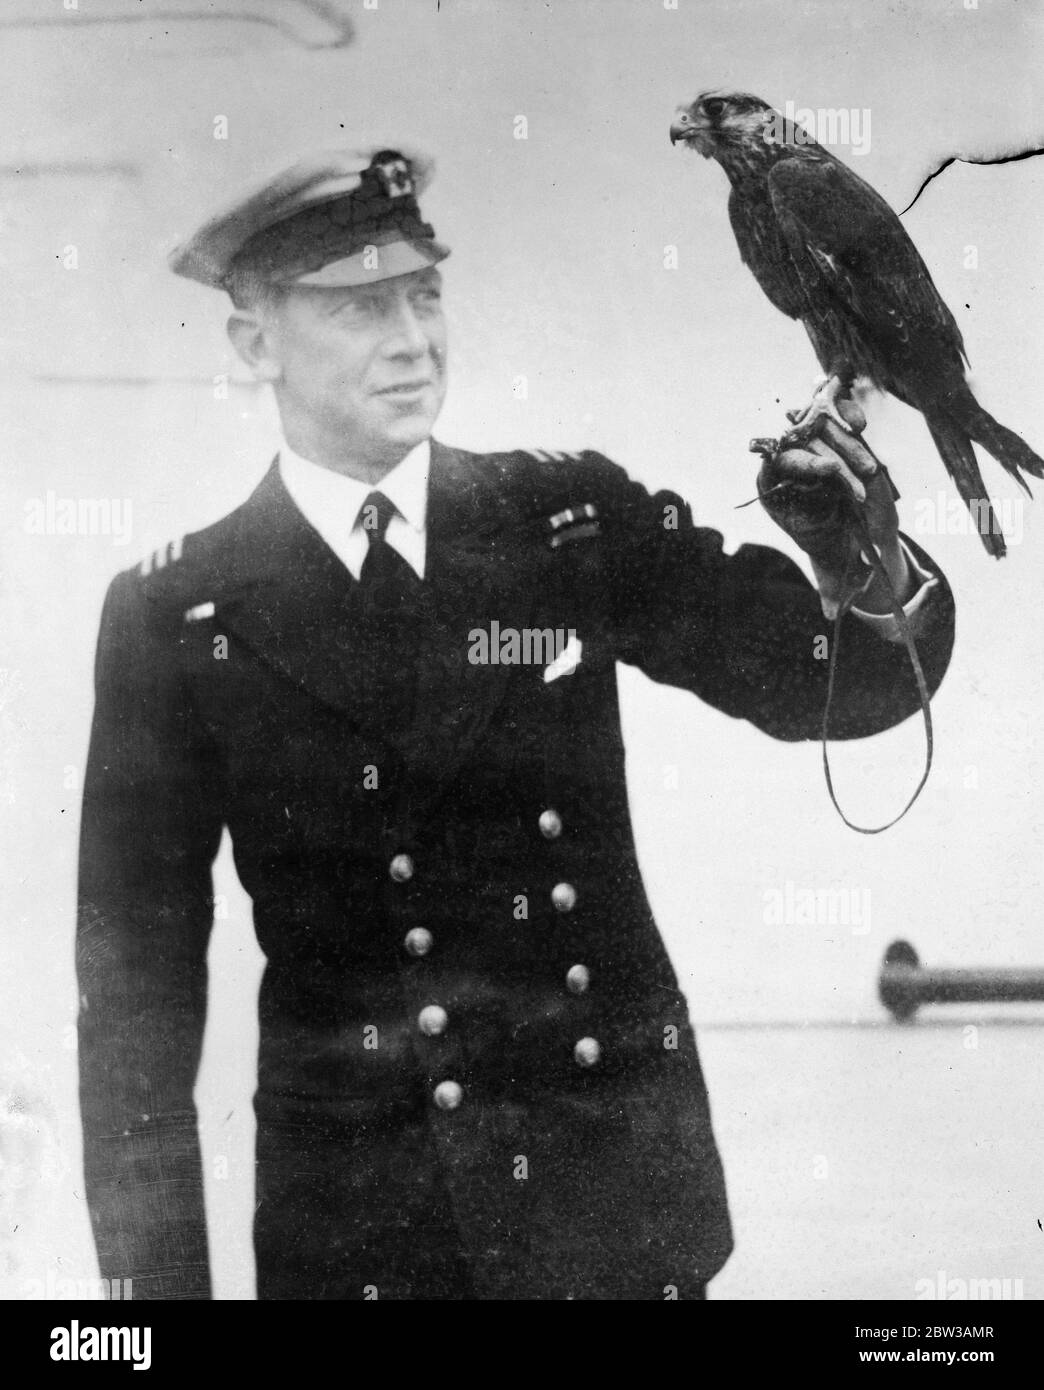 Falcon as ship mate . A falcon which was blown aboard the SS Orara in the middle of the Red Sea was adopted by the crew of the ship . Photo shows Chief officer W J S Metcalf of the SS Orara , with the falcon poised on his wrist . 14 September 1934 Stock Photo